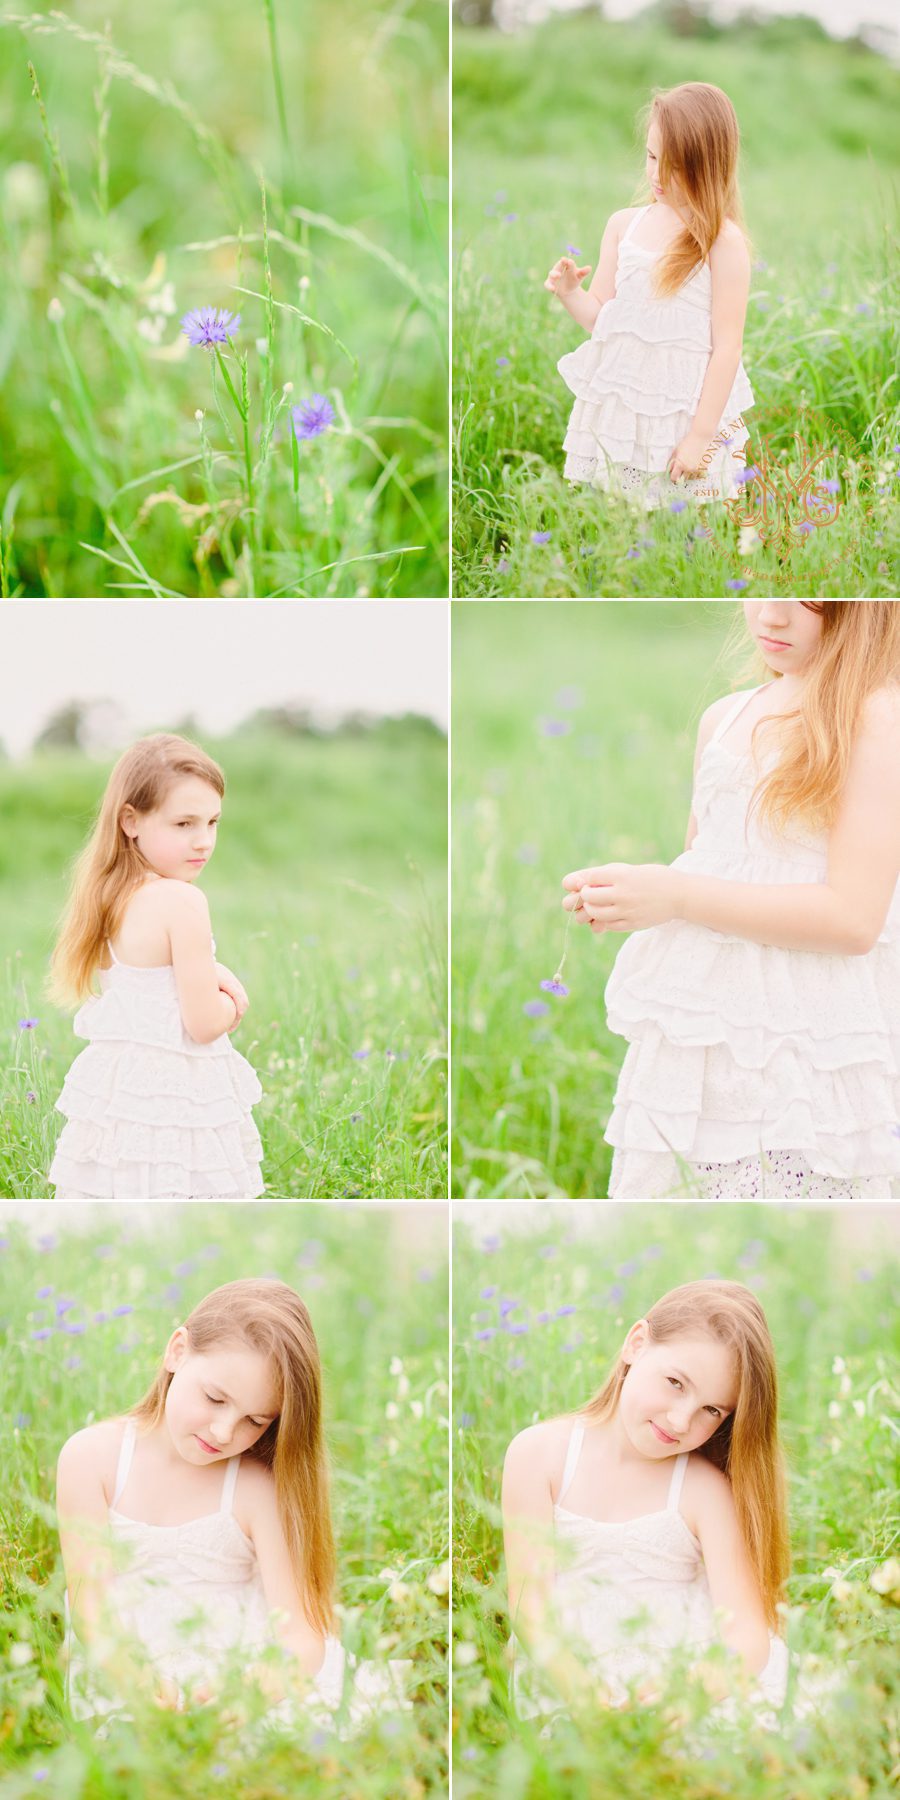 Natural child photography of 2nd grader in field in Watkinsville, GA.